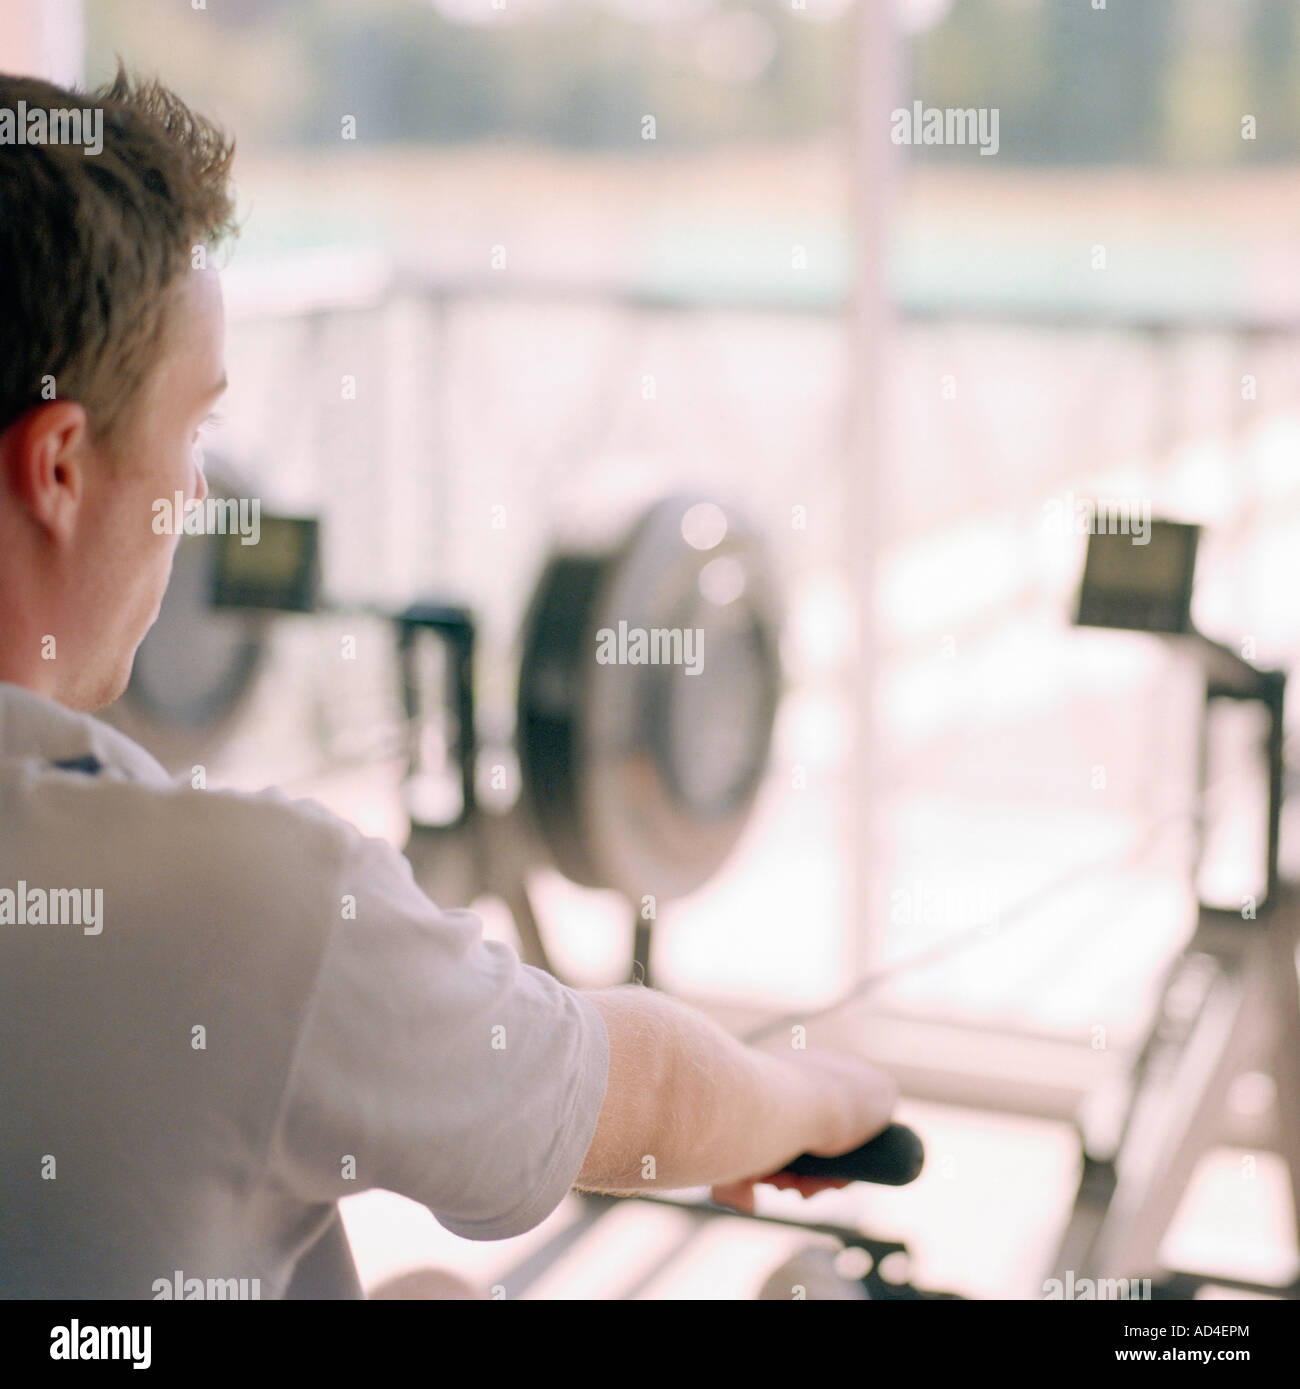 Over the shoulder view of man using rowing machine Stock Photo